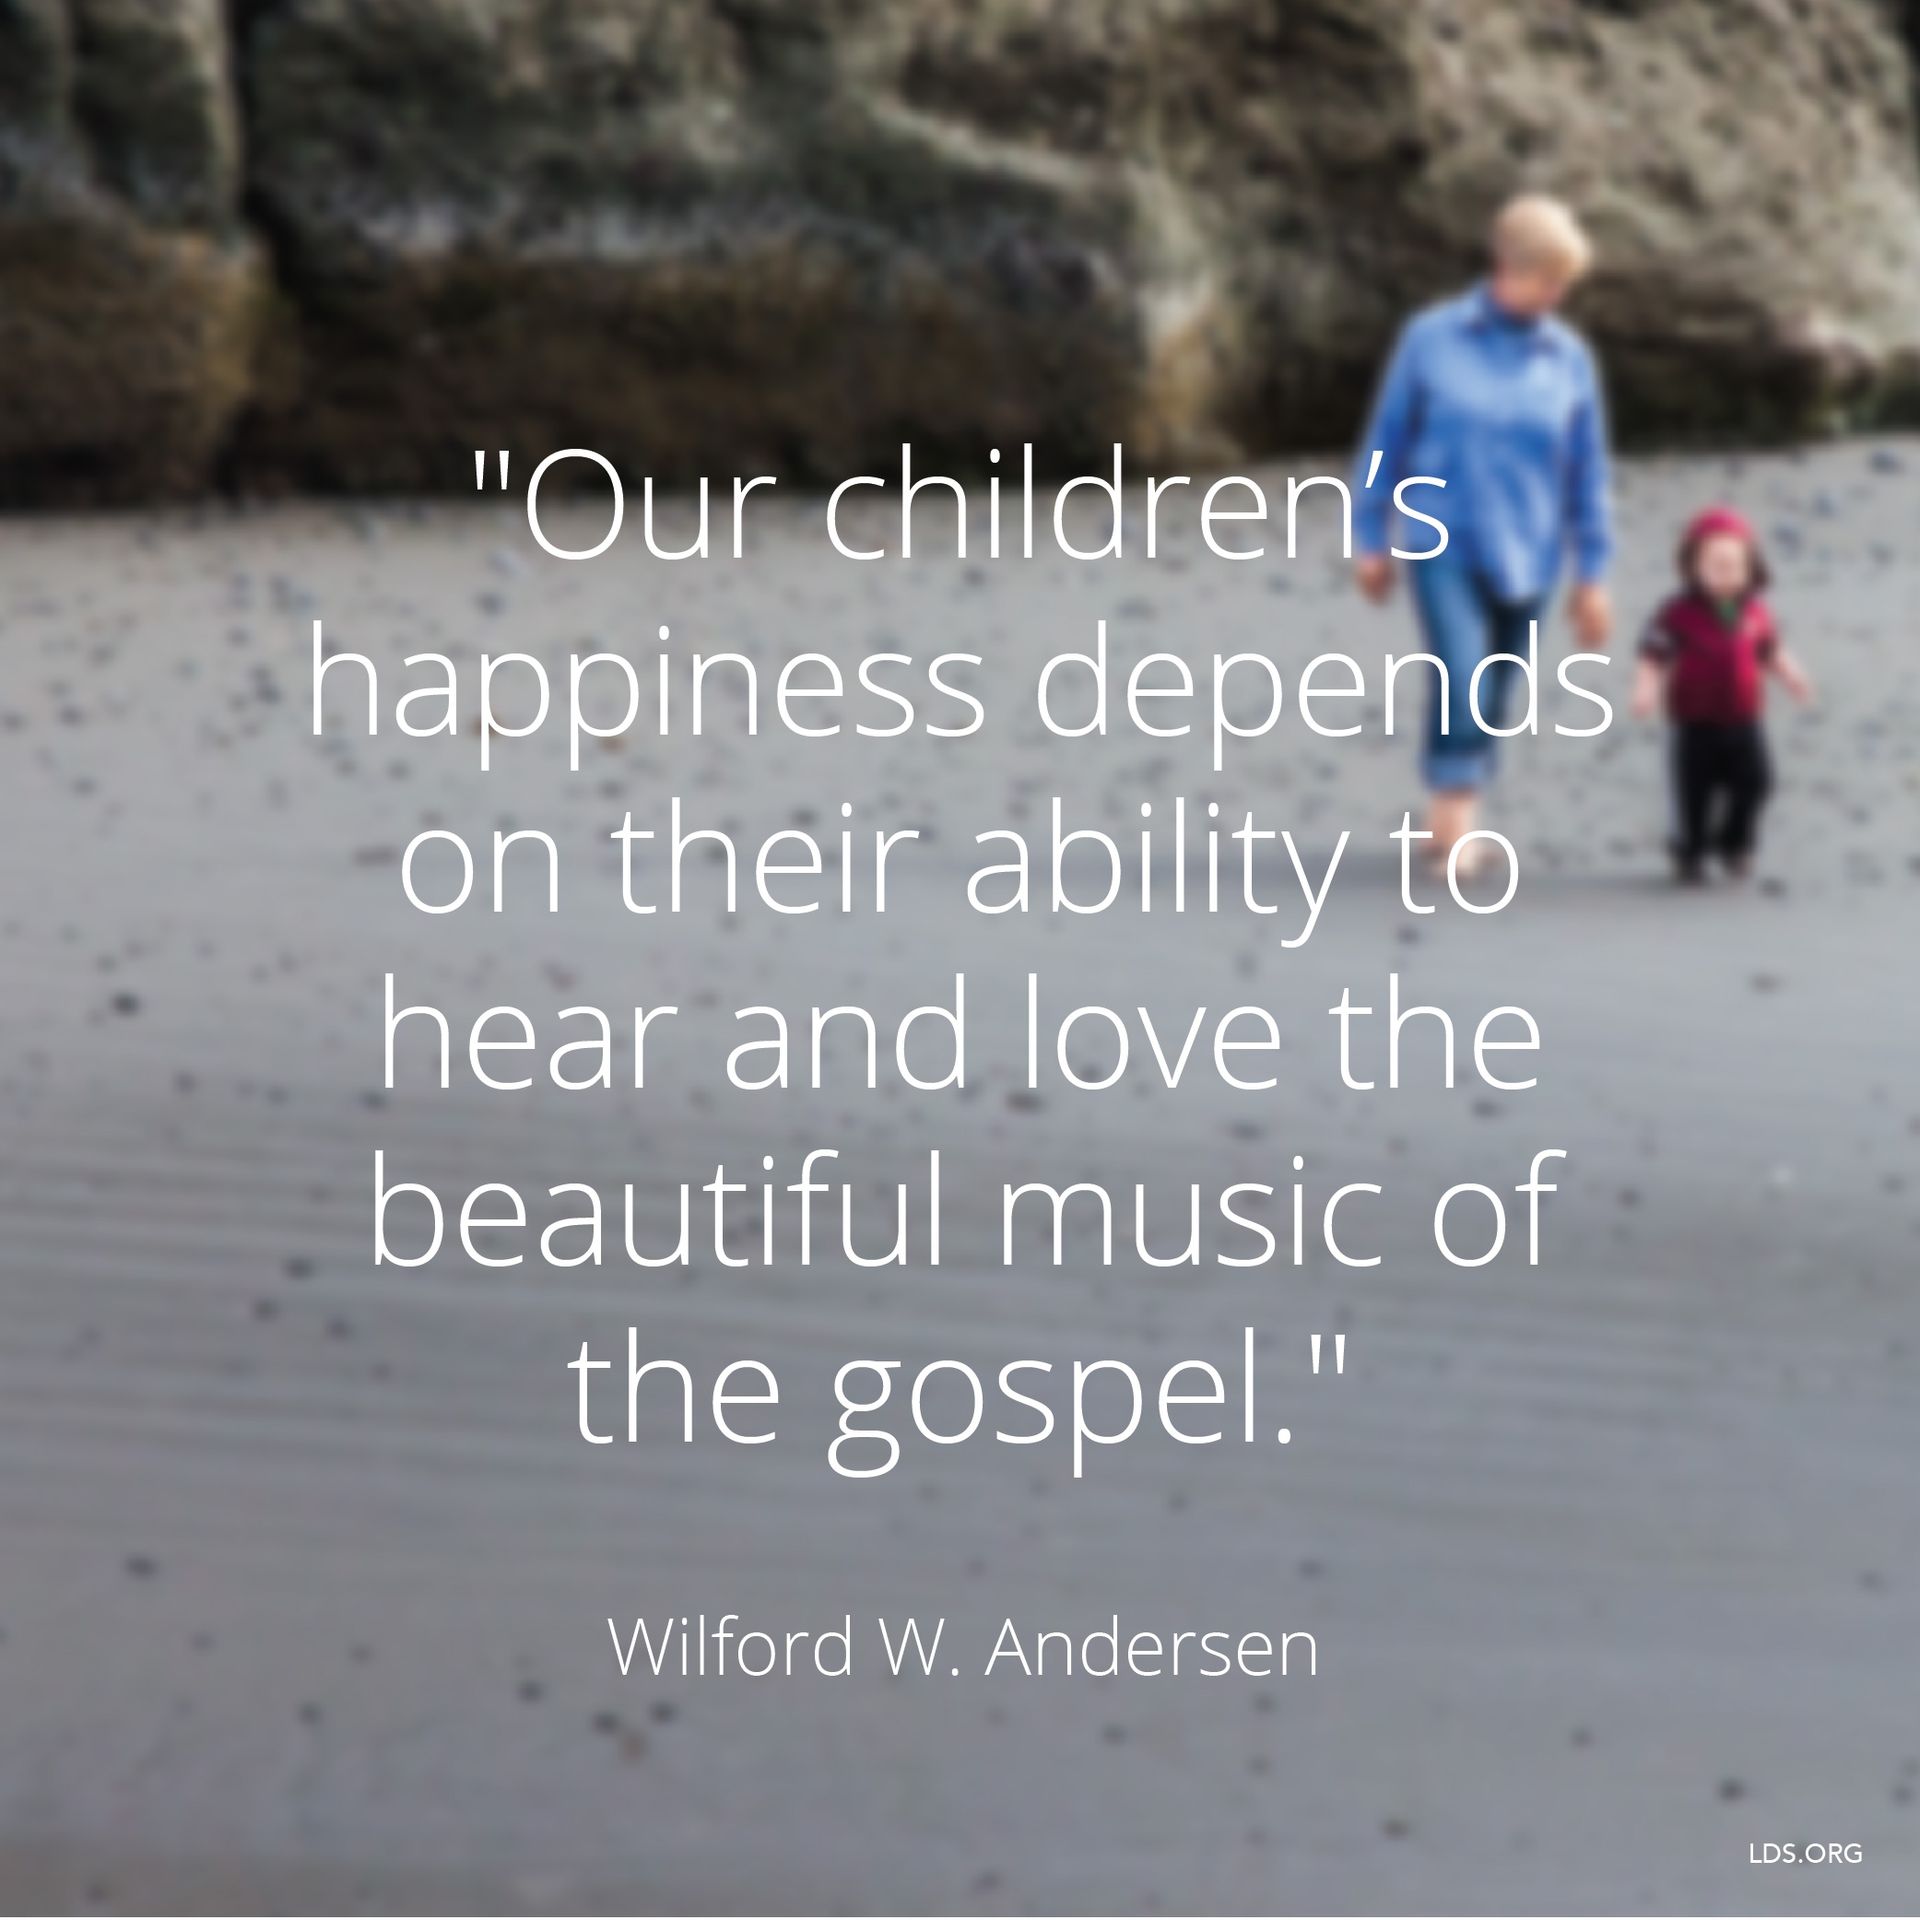 “Our children’s happiness depends on their ability to hear and love the beautiful music of the gospel.”—Elder Wilford W. Andersen, “The Music of the Gospel” © undefined ipCode 1.